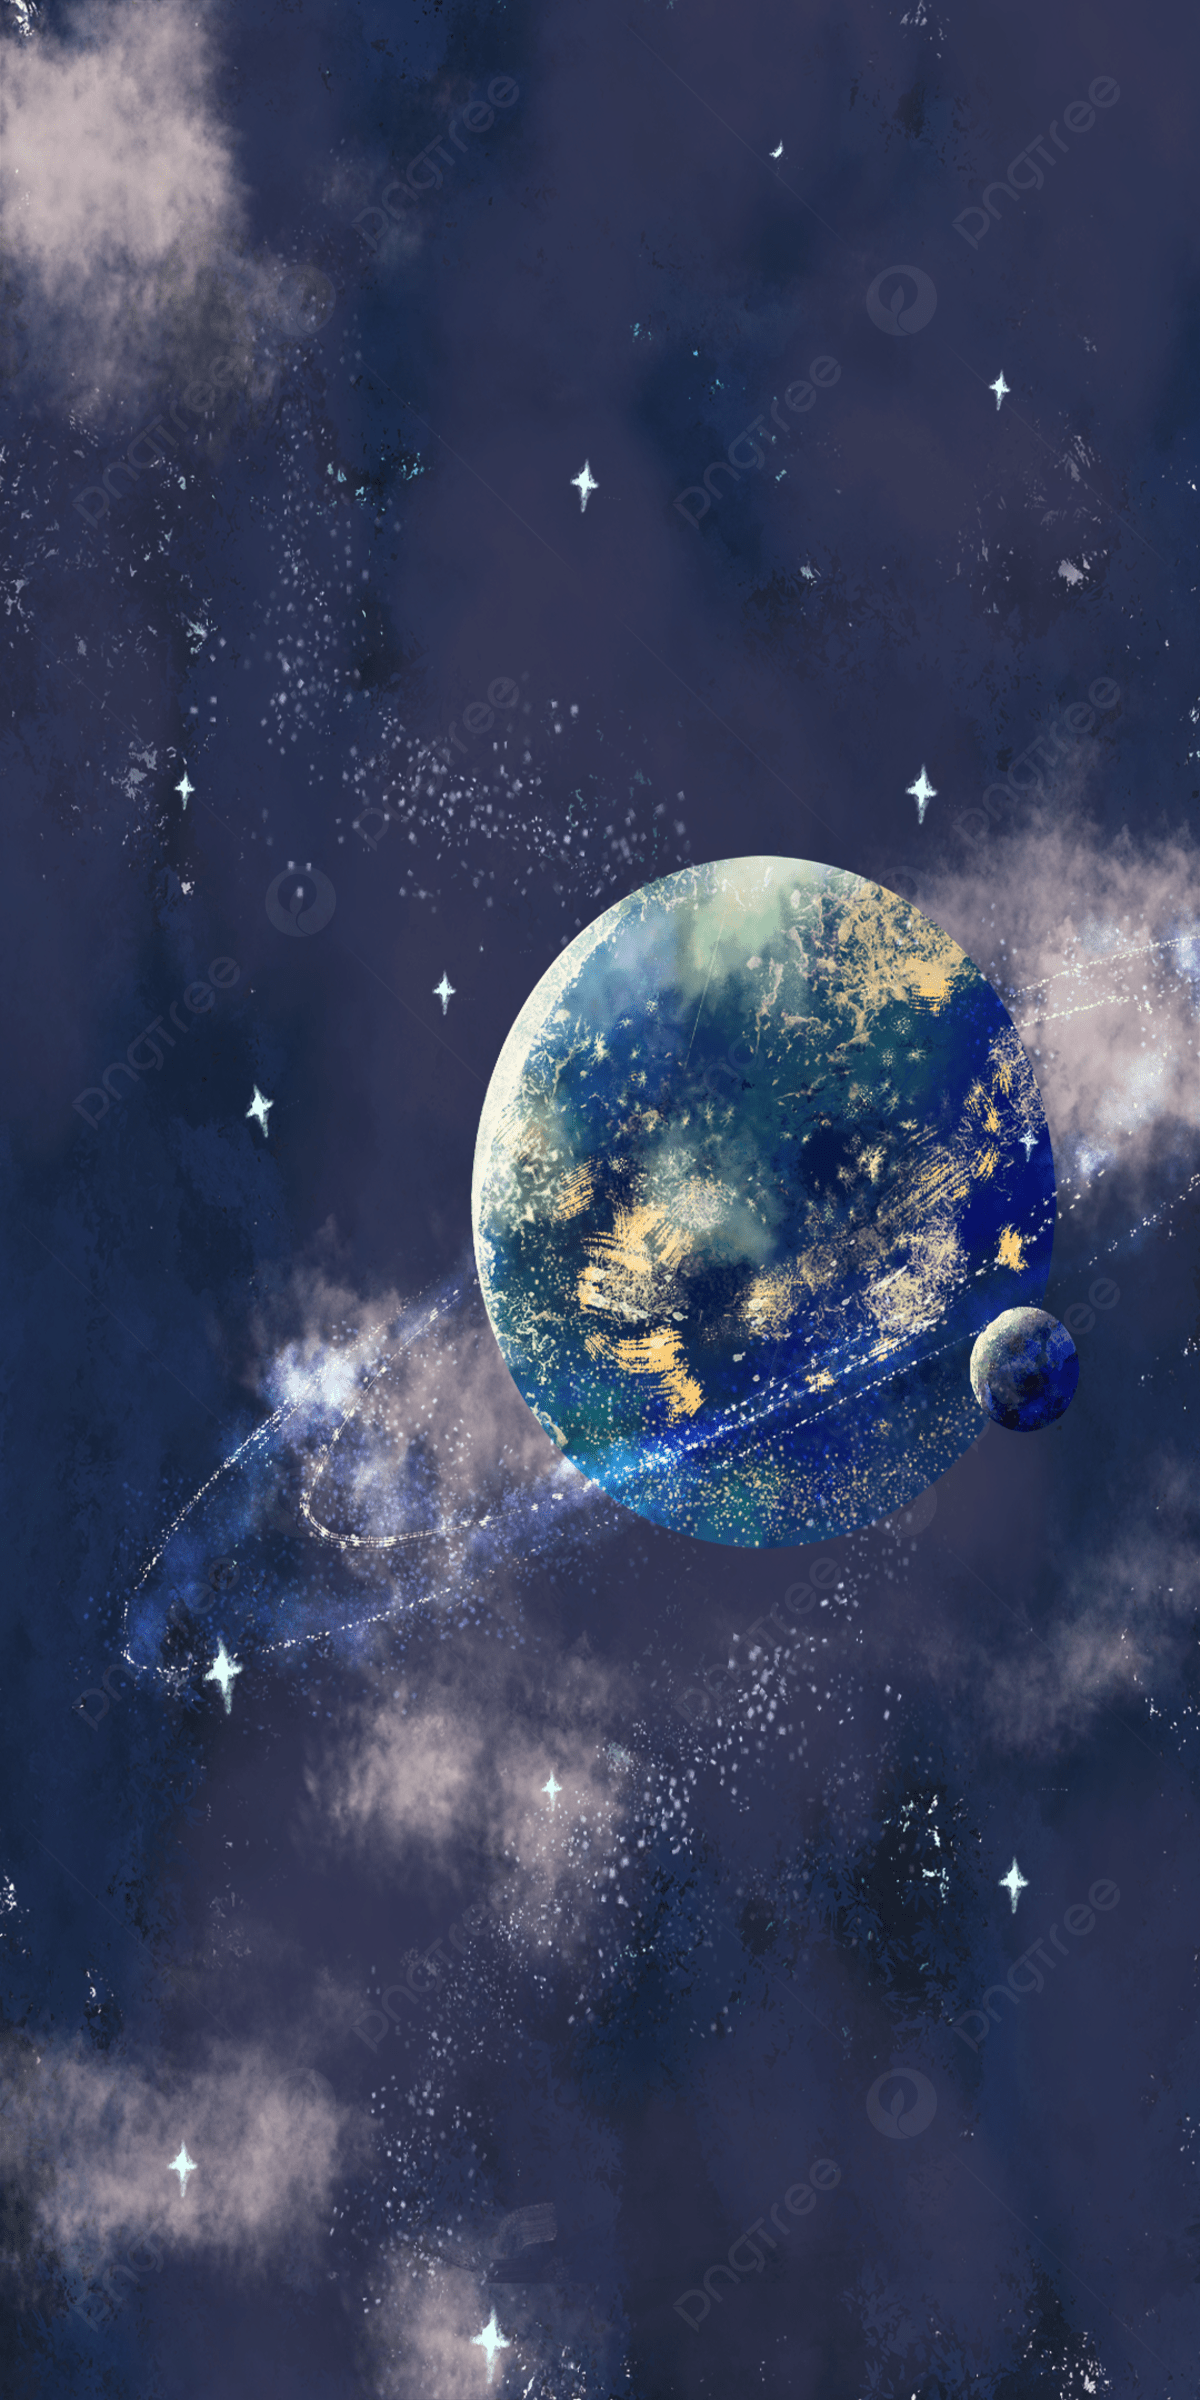 A digital painting of a planet with a ring system - Planet, constellation